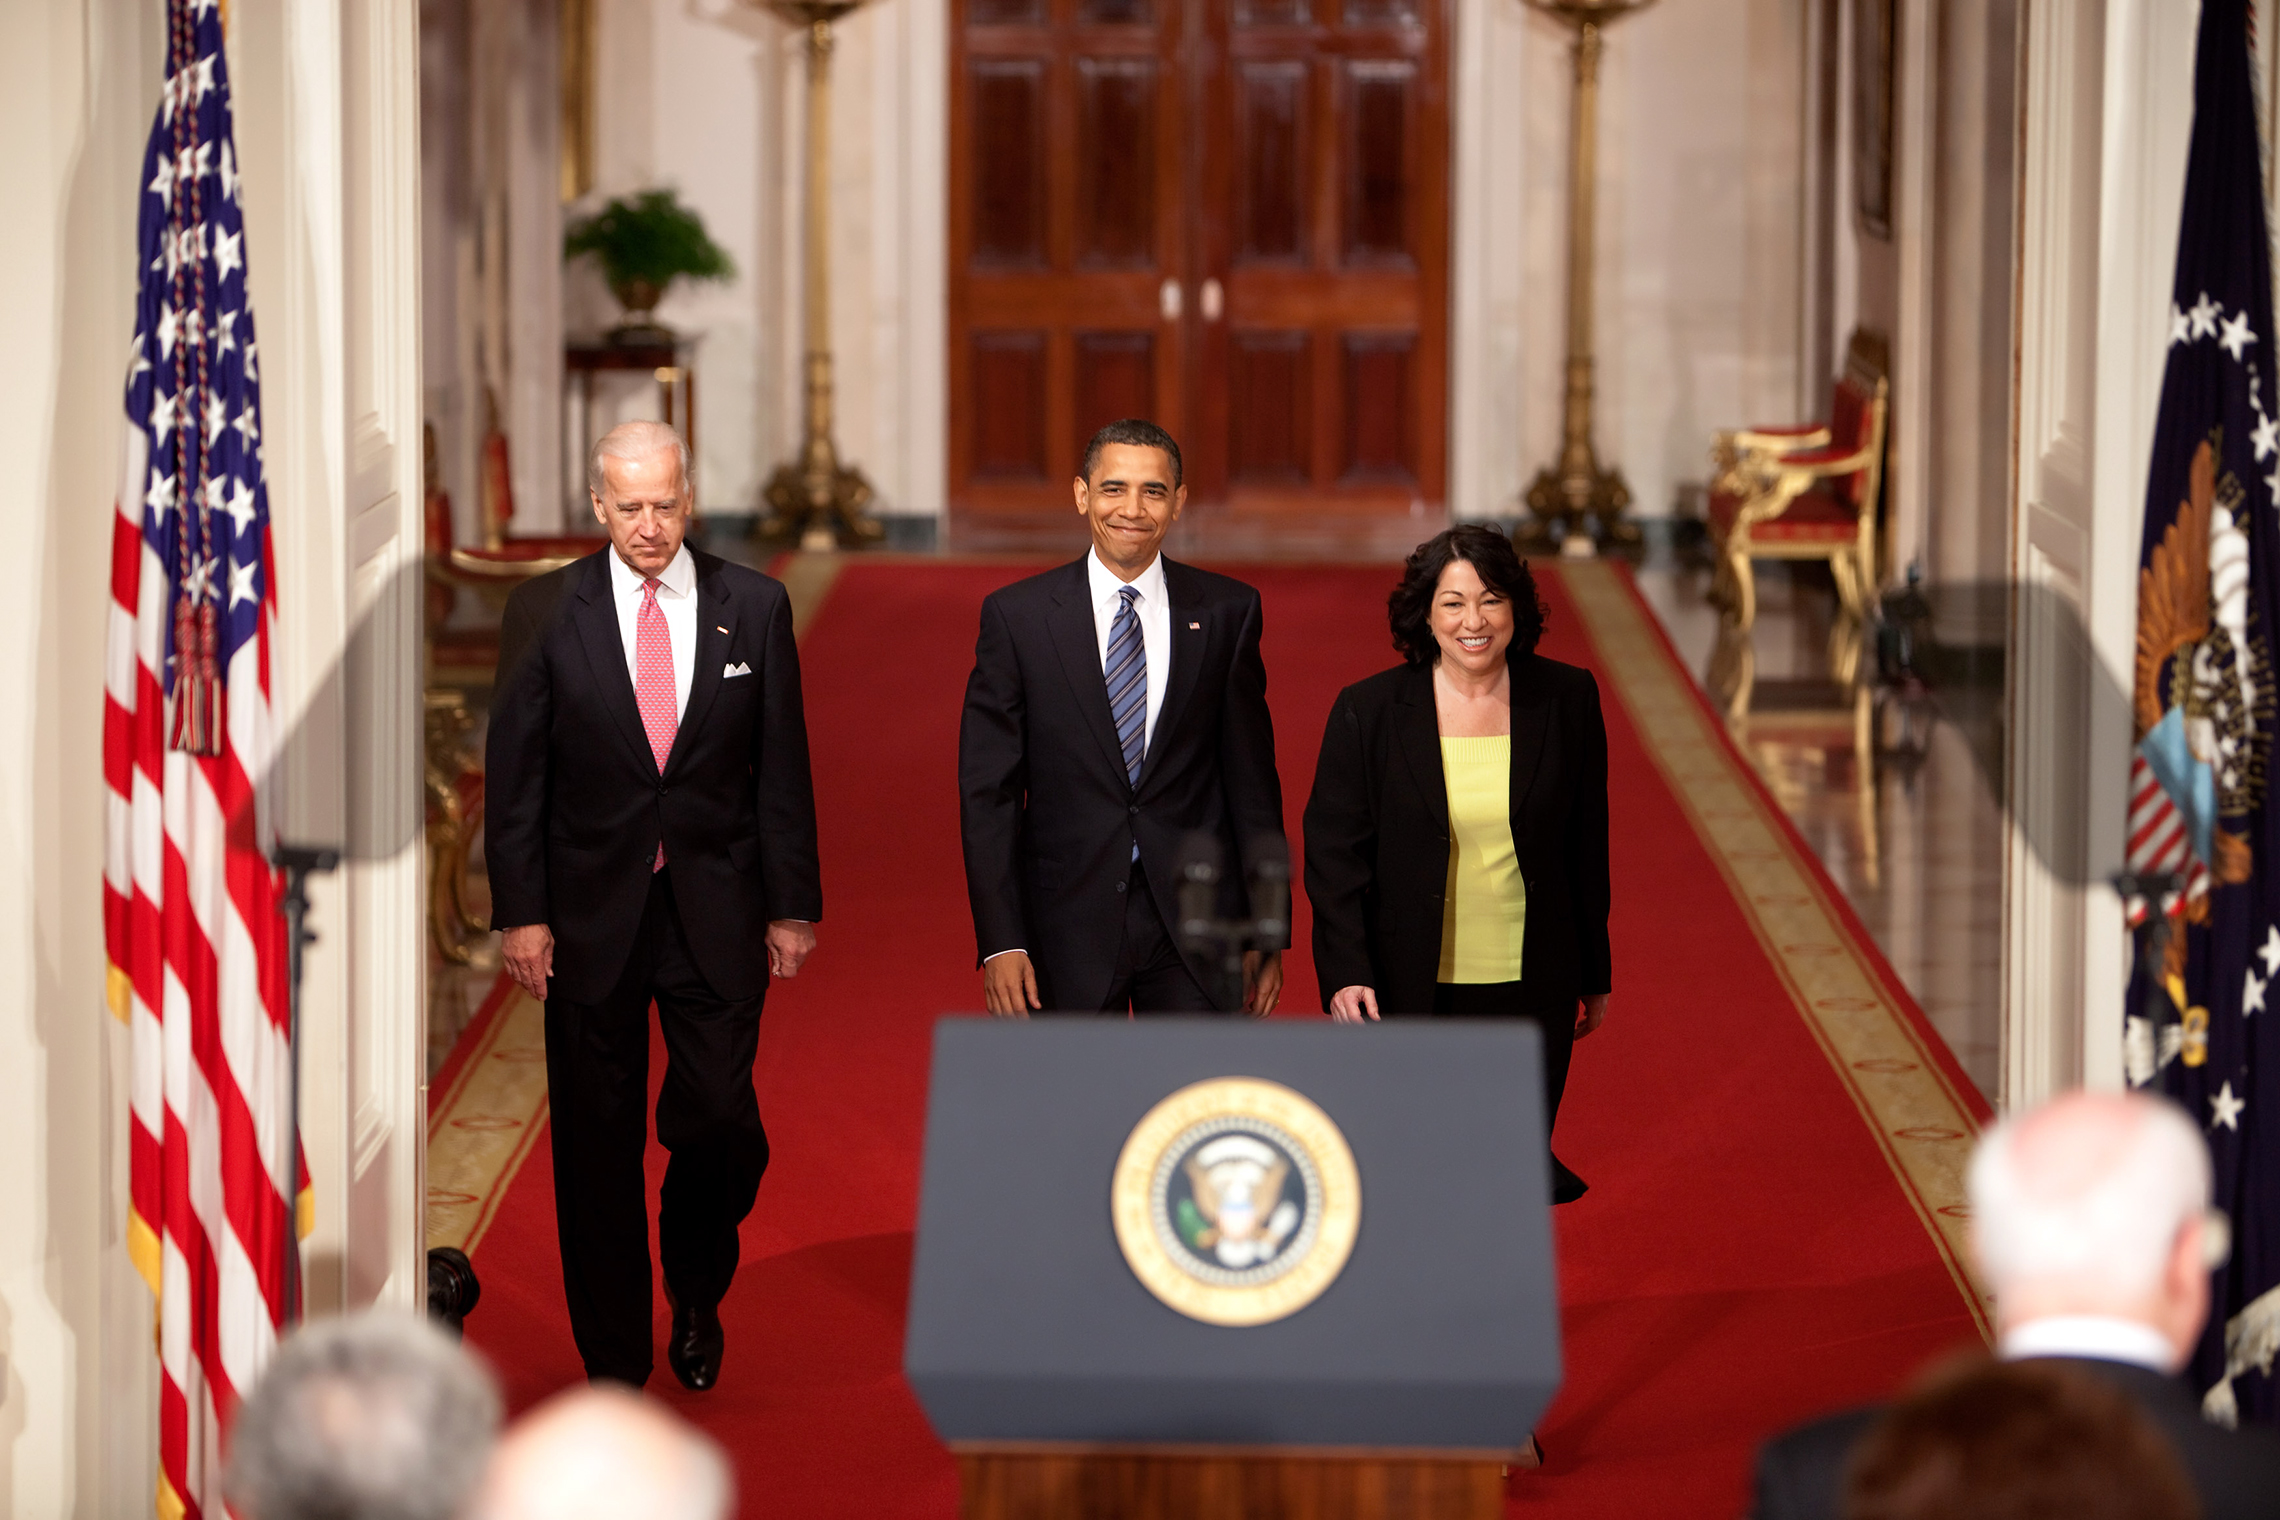 sonia sotomayor biography research